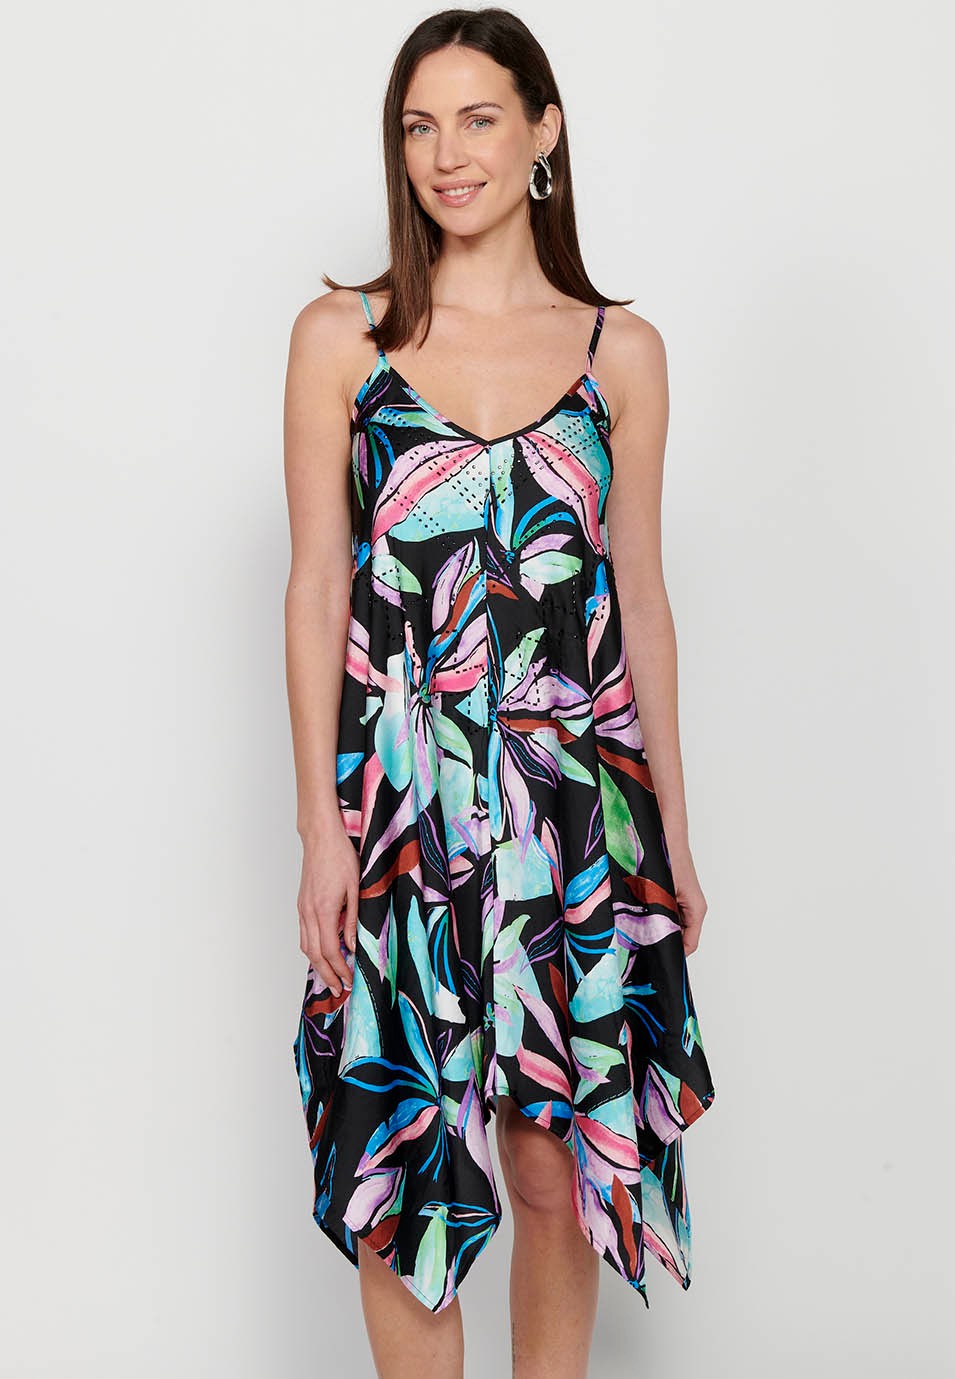 Midi dress with adjustable straps with sparkling neckline and long peaked finish with Multicolor floral print for Women 7